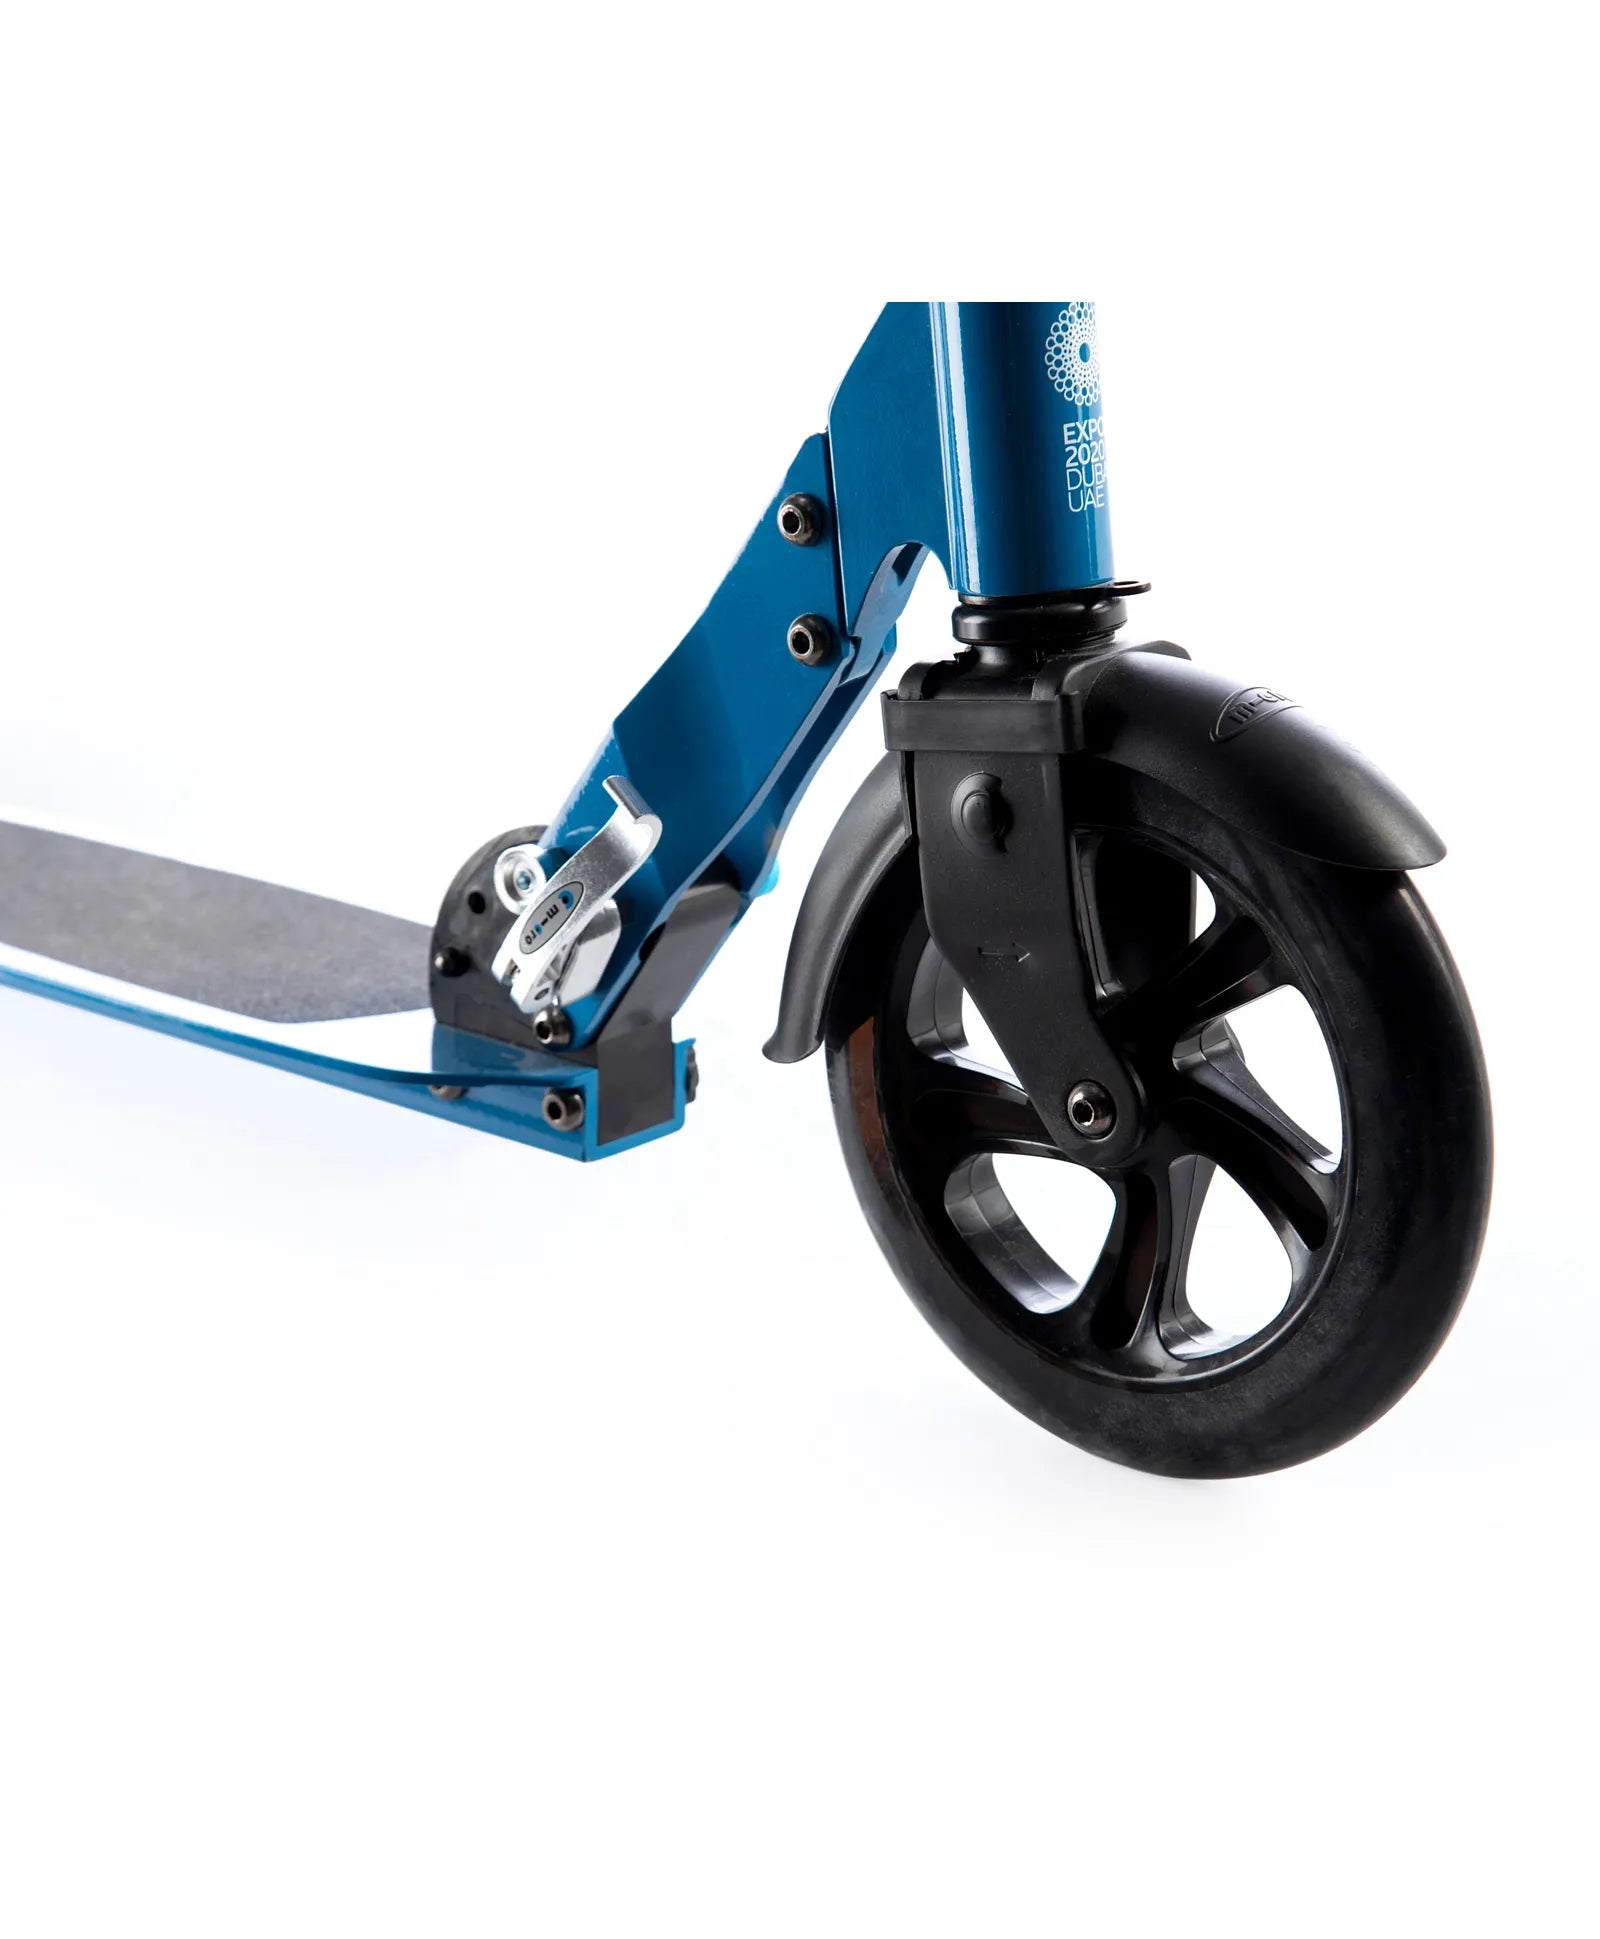 Micro 200 mm EXPO 2020 Scooter - Blue - Laadlee